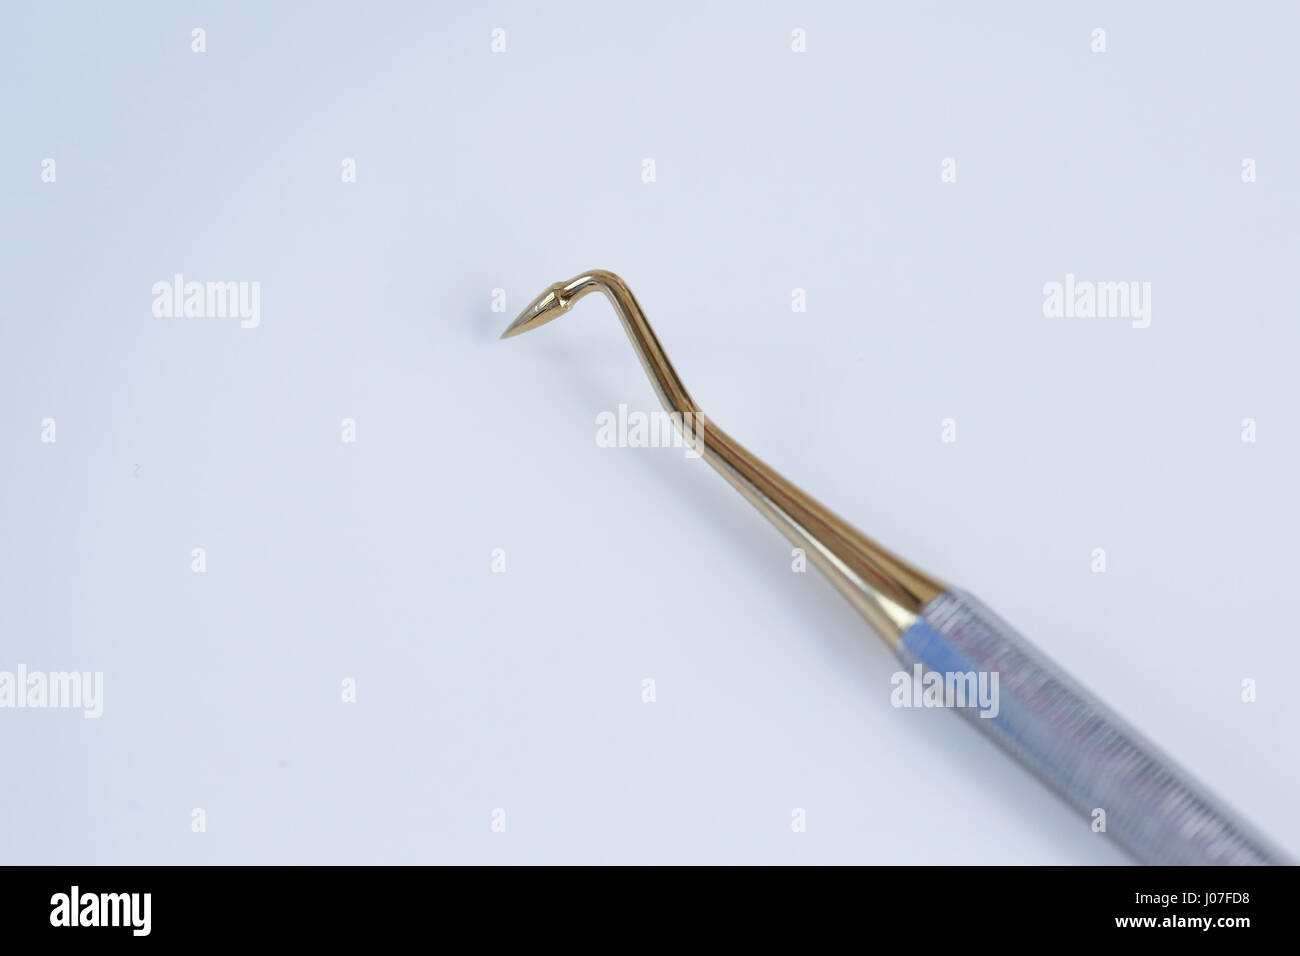 Dental tool - burnisher with golden tapered cone Stock Photo